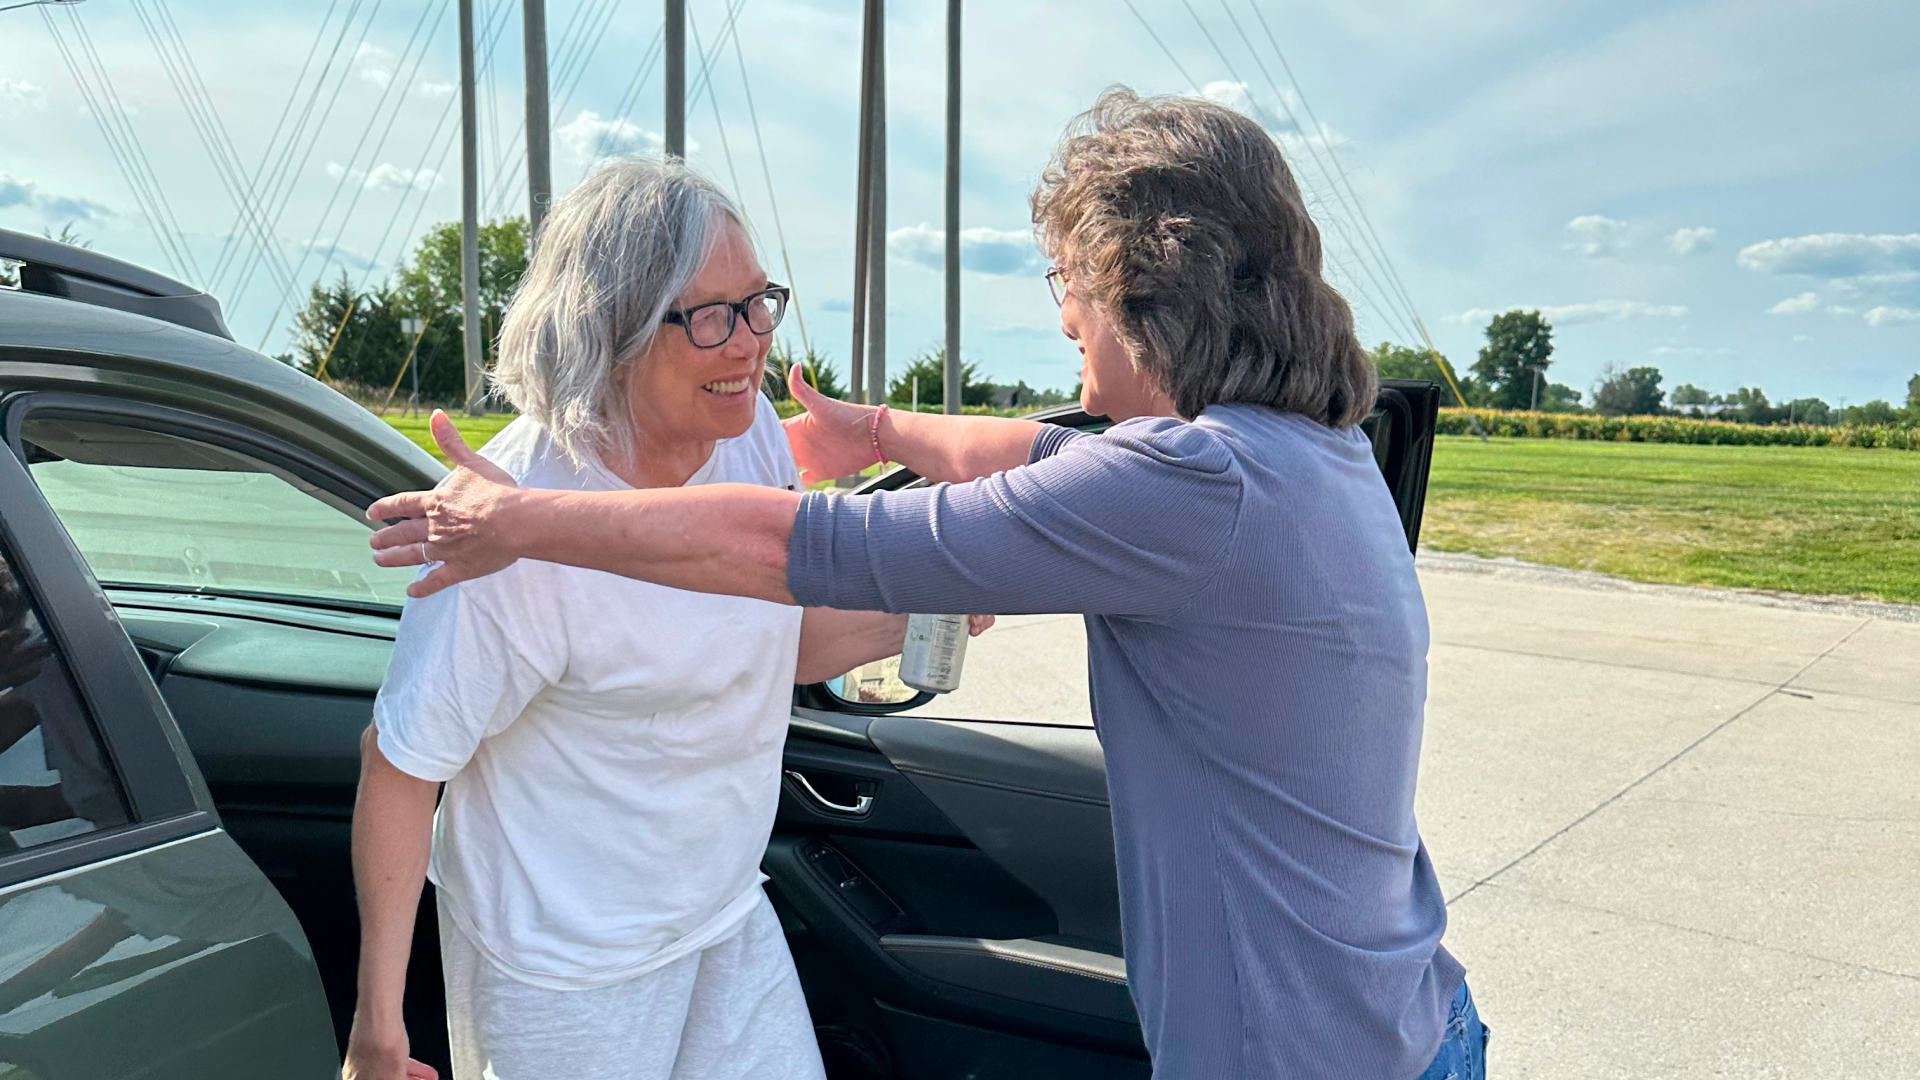 Chillicothe, MO — Sandra Hemme walks out of prison after 43 years. She is the longest-known wrongly incarcerated woman in the U.S. (Image: Courtesy of the Hemme legal team)
